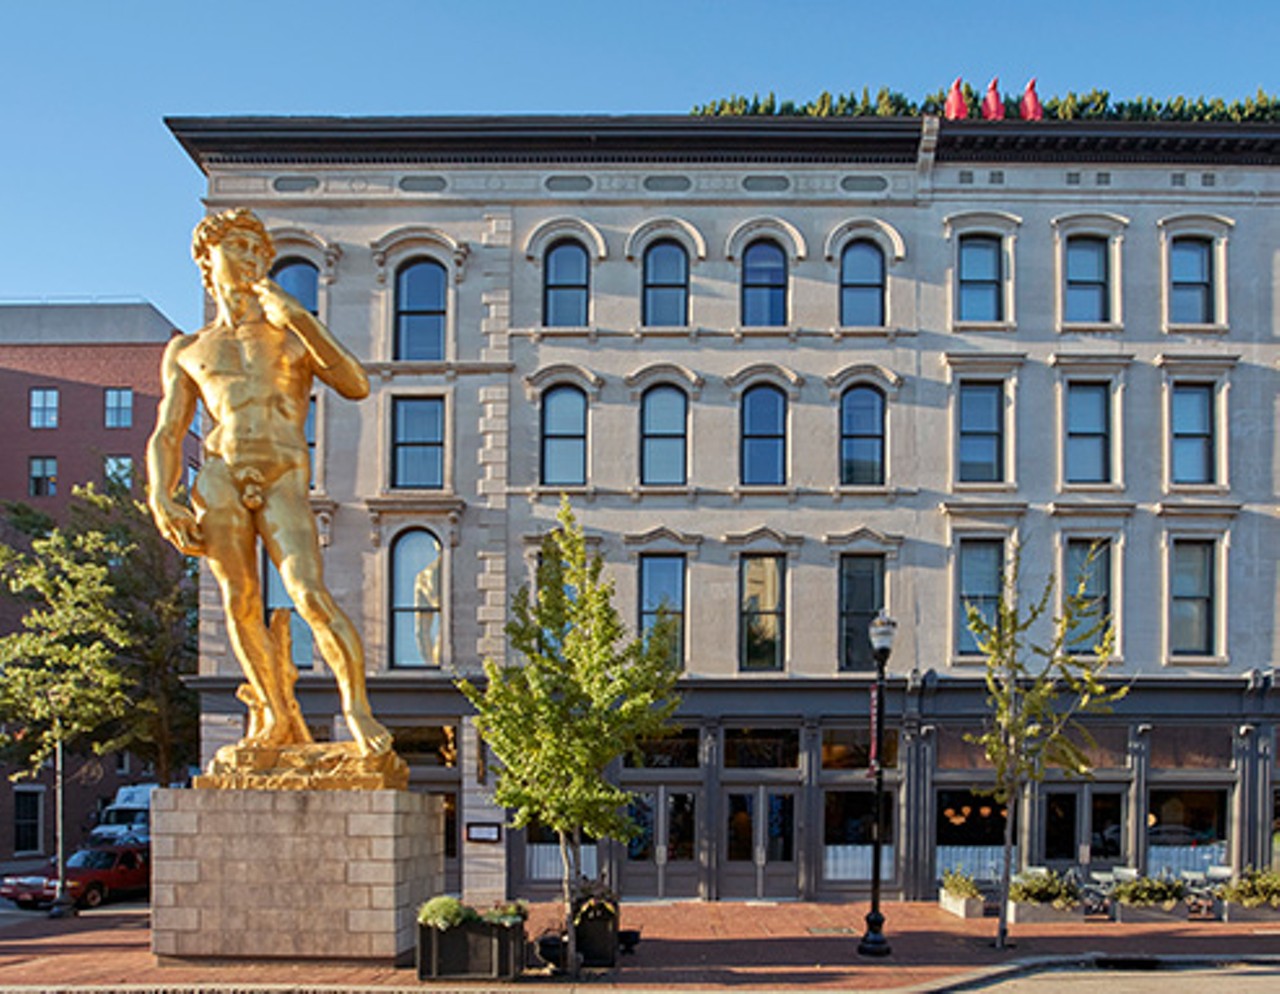  21c Museum Hotel
700 W Main Street 
There's a contemporary art museum inside and a gigantic gold statue of a very naked David outside.
Photo via Facebook.com/21cLouisville